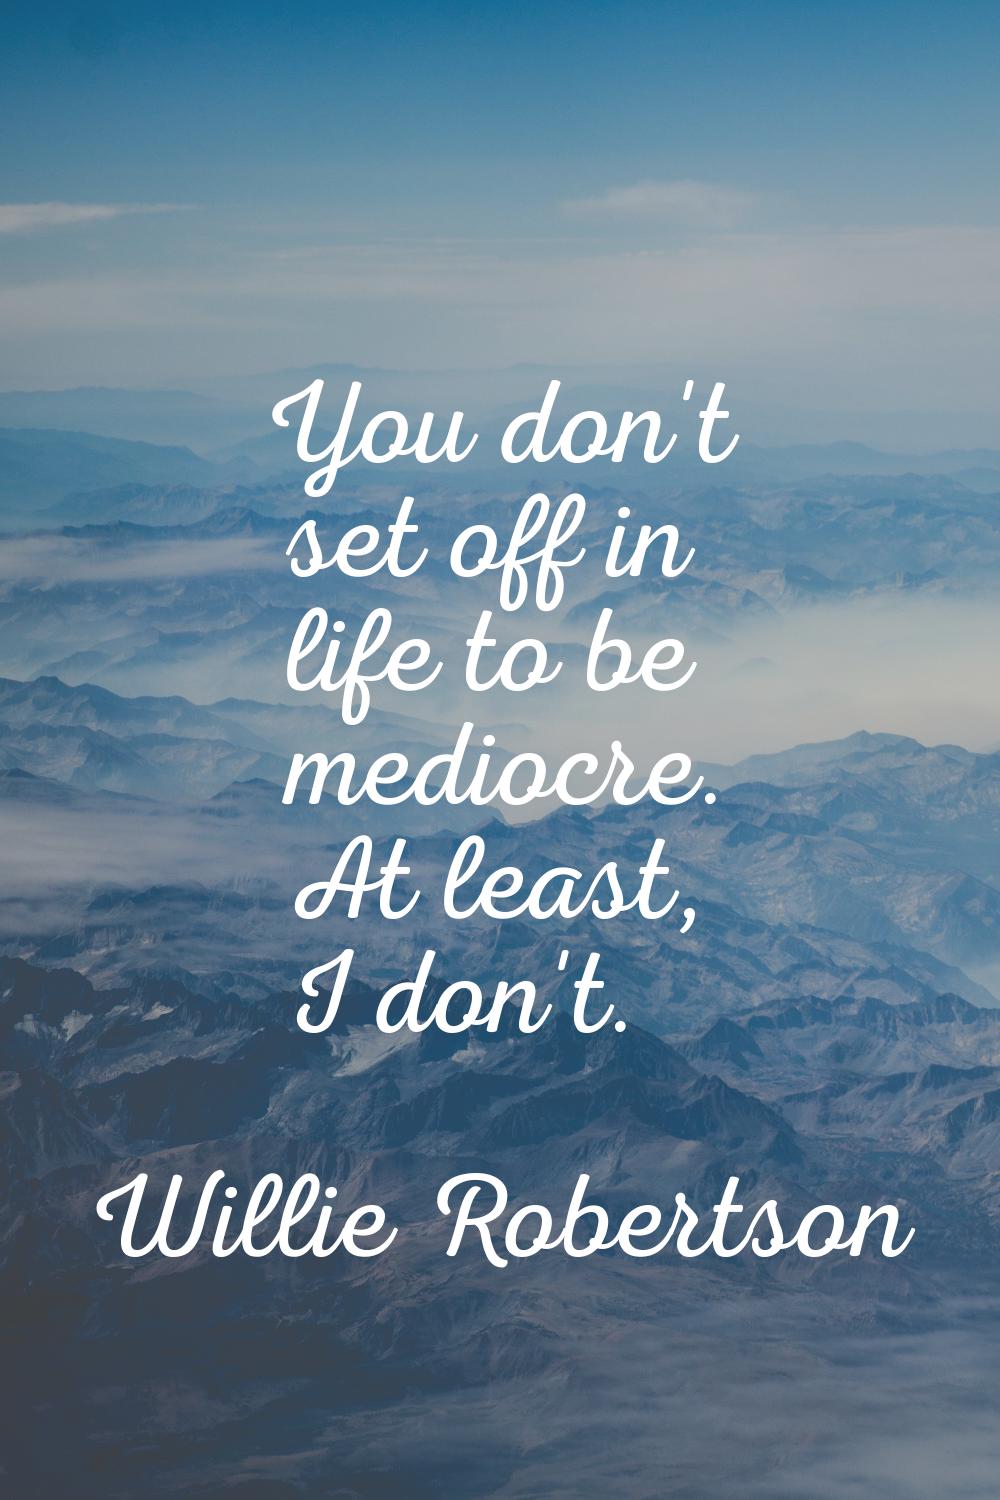 You don't set off in life to be mediocre. At least, I don't.